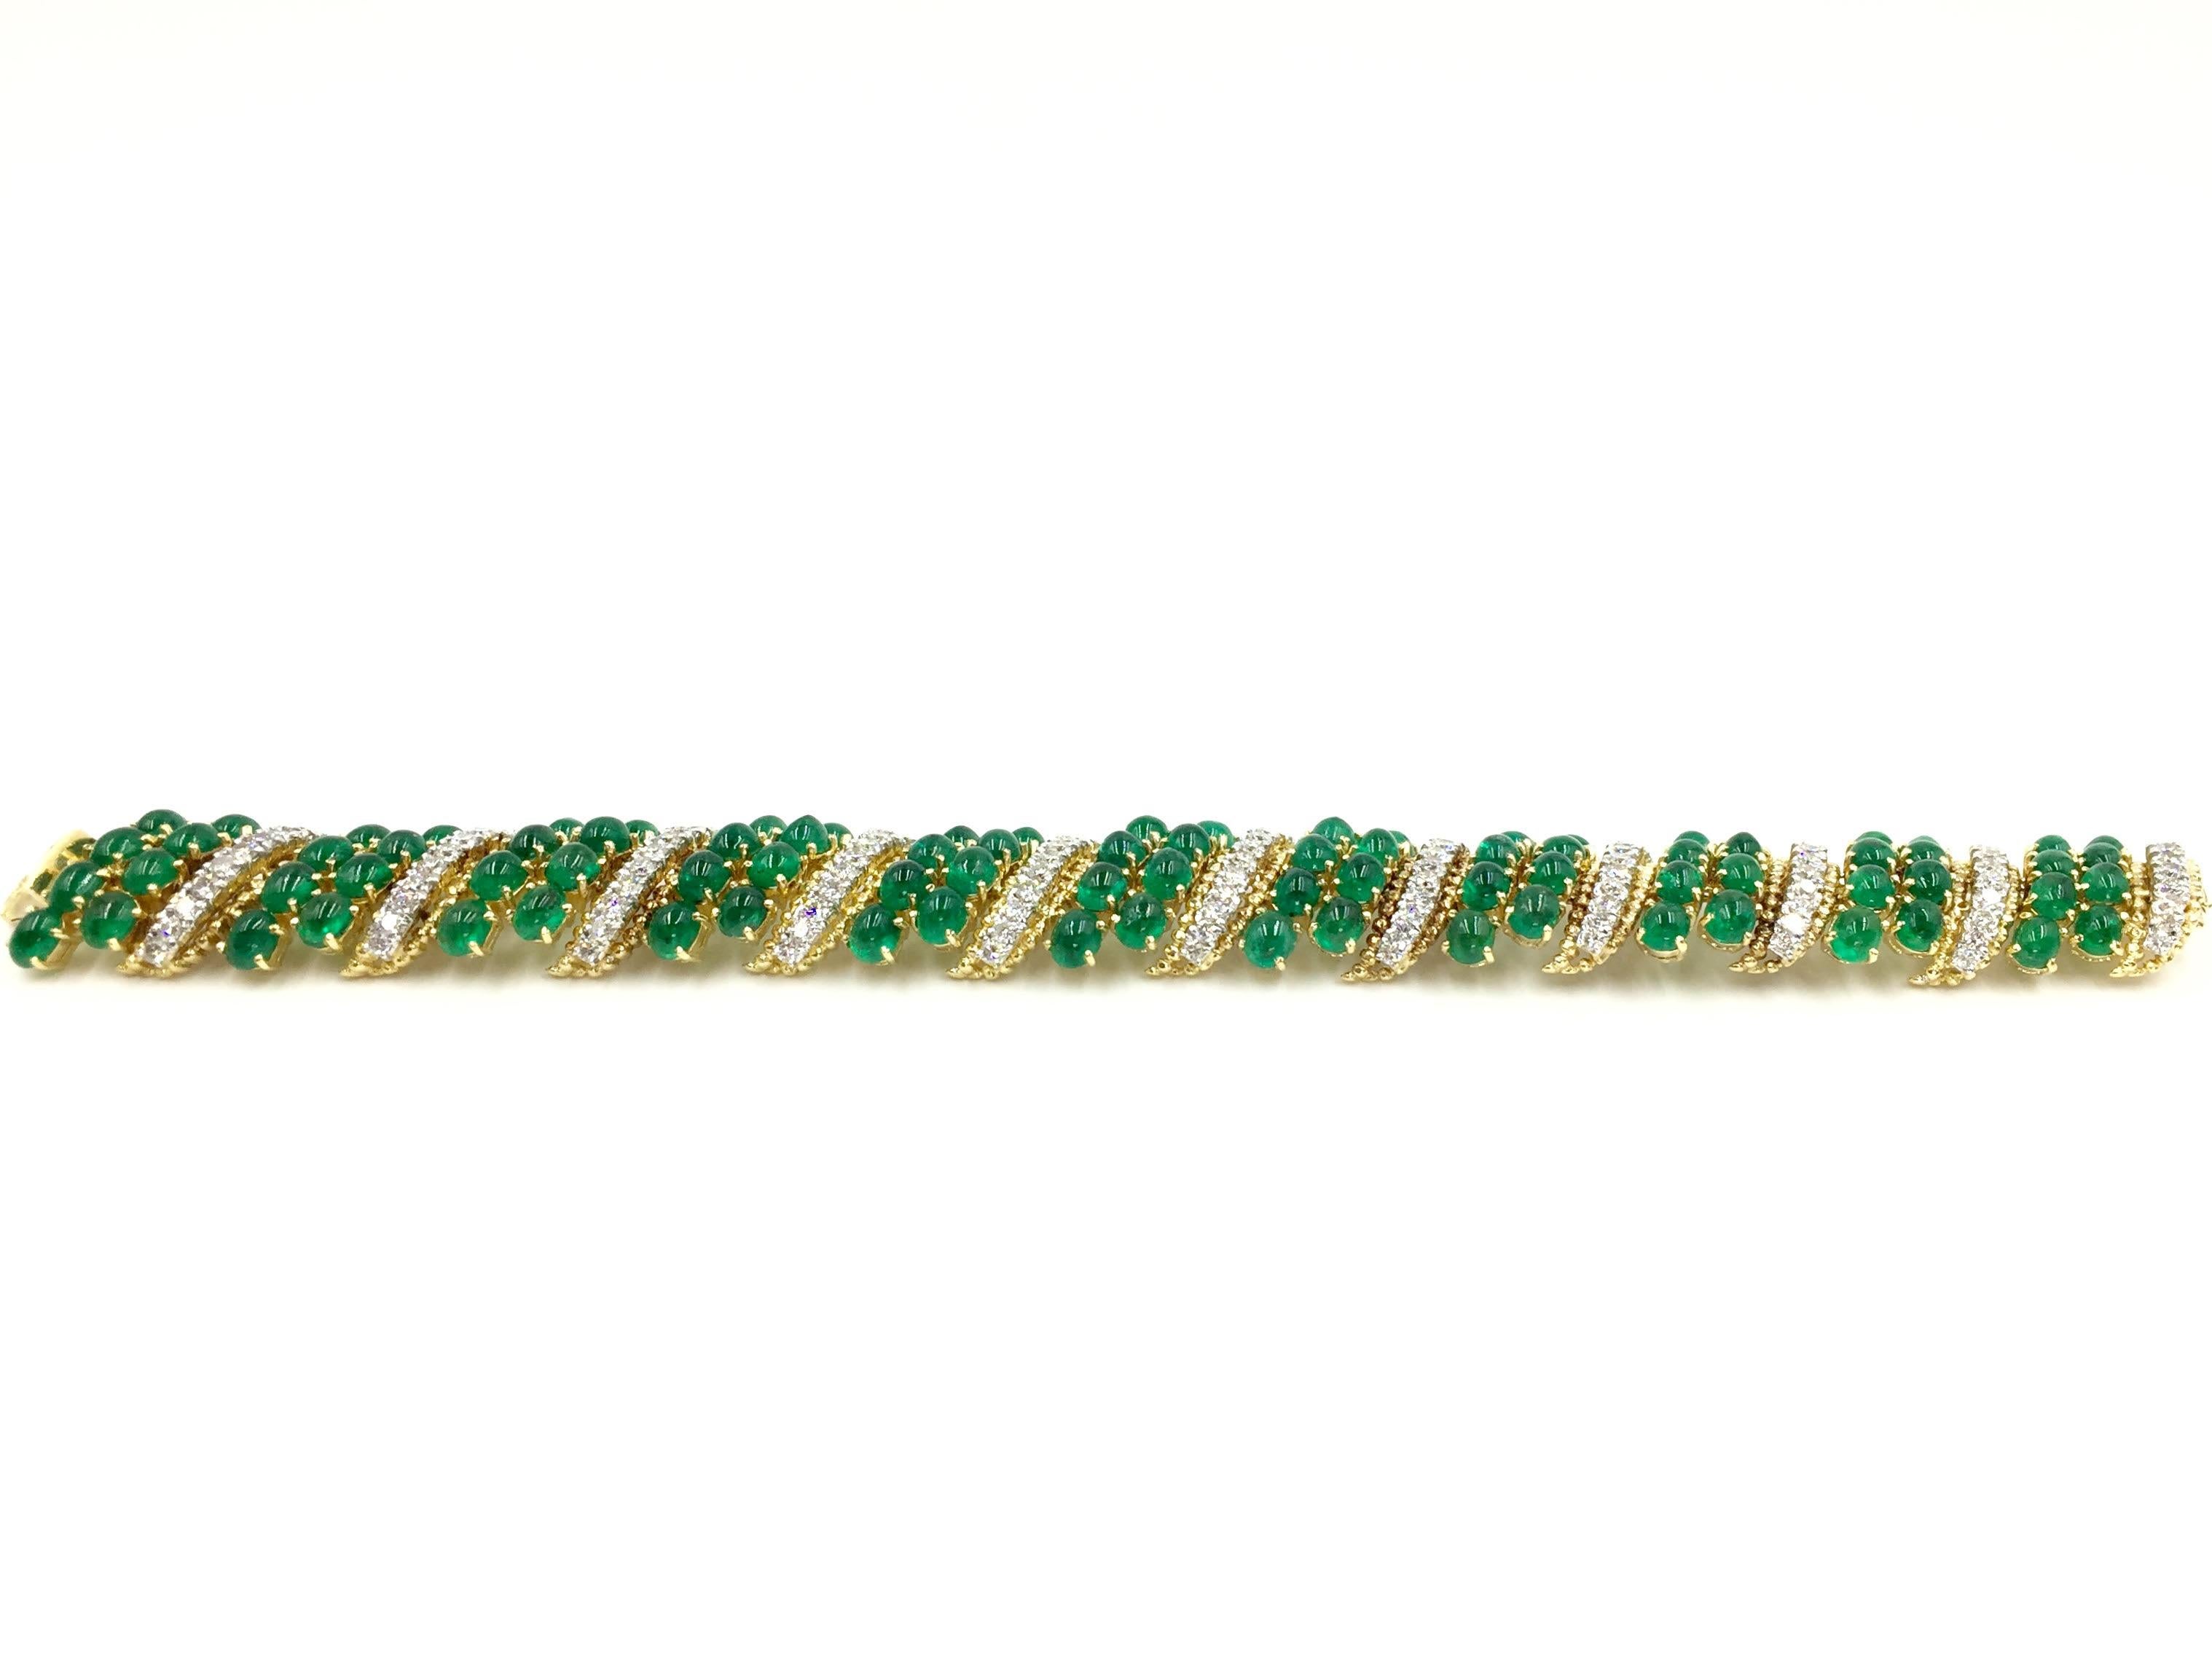 This wide bracelet is designed with beautiful craftsmanship using 4.55 carats of round brilliant diamonds and 36.56 carats of genuine cabochon emeralds. Emeralds have a rich, vivid green tone. Diamonds have an approximate color F and clarity VS2 and